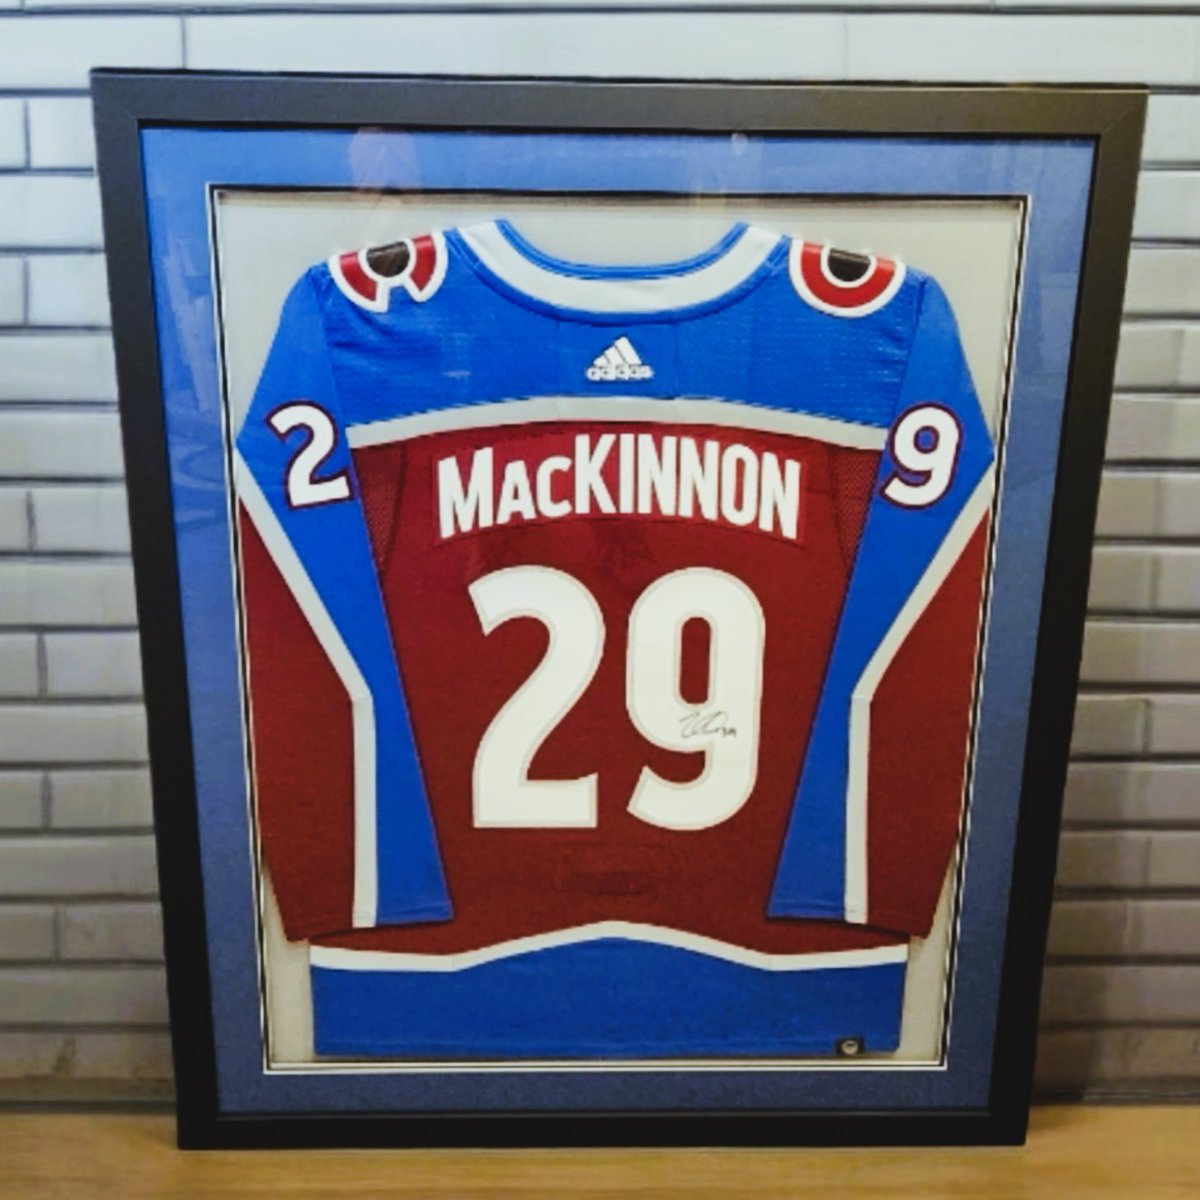 Go Avs!  Good luck tonight!  We love being the place to frame your jerseys for Avs fans from all over Colorado!

#ColoradoAvalanche #Avs #Hockey #Denver #Colorado #framing #customframing #pictureframing #art #decor #walldecor #milehighcity #cityofdenver #cityofEnglewood…